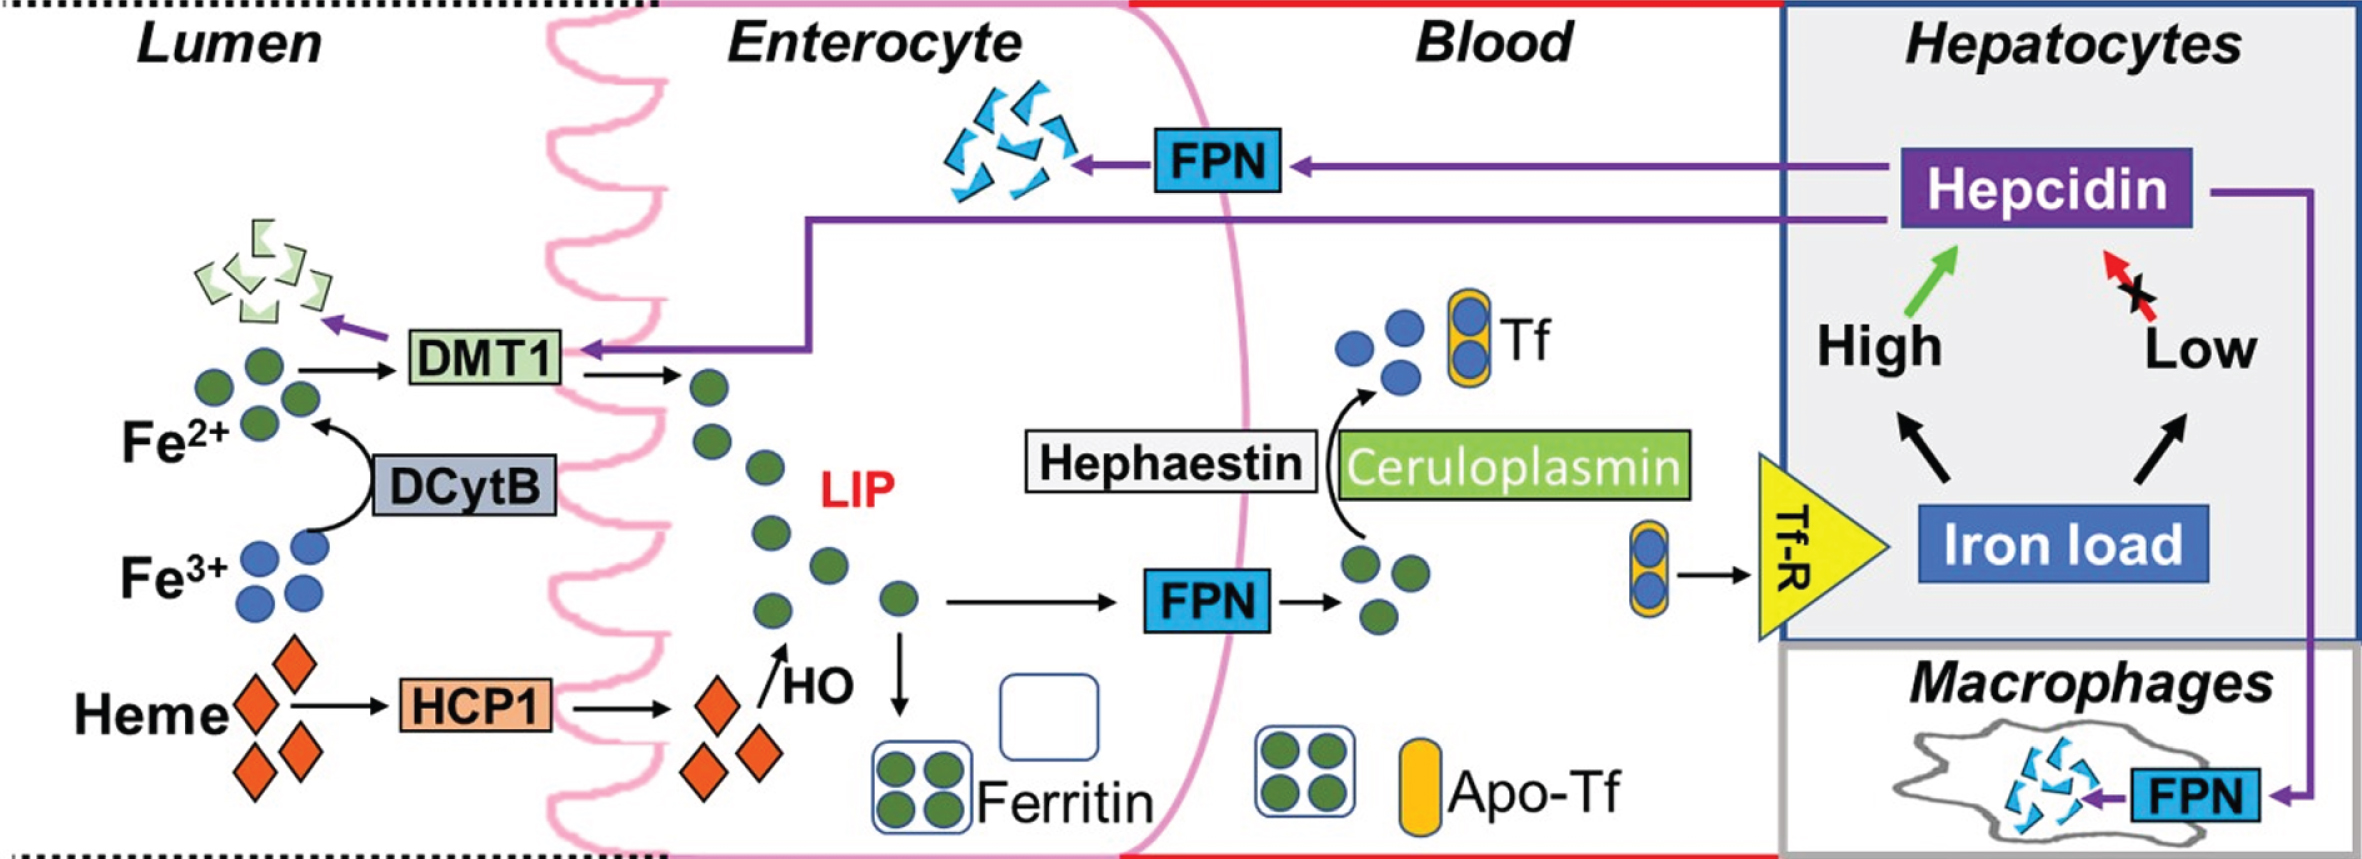 Regulation of blood iron levels by hepcidin. Dietary iron in the lumen of duodenum is present in the form of heme and ferric ions (Fe3+). While heme is absorbed into enterocytes via the heme carrier protein 1 (HCP1), ferric ions are first converted to ferrous ions (Fe2+) by duodenal Cytochrome B (DCytB) to enable binding to the divalent metal transporter 1 (DMT1) thereby facilitating transport into enterocytes. Ferrous ions transported by DMT1 and the ferrous ions generated from heme (via heme oxygenase 1, HO) contribute to the labile iron pool (LIP). Ferrous ions in the LIP are then either stored in the iron storage protein, ferritin, or released into the blood via ferroportin (FPN) present on the basolateral membrane of the enterocyte with subsequent conversion to ferric ions via hephaestin (on the membrane) or ceruloplasmin (in the blood). These ferric ions can then be loaded into the iron carrier protein, transferrin (Tf), which bind to transferrin receptors (Tf-R) on tissue cell membranes resulting in iron transport to different tissues. When iron load in the tissue is high, hepcidin is released resulting in the internalization and degradation of the hepcidin-ferroportin complex (or hepcidin-DMT1 complex). This prevents further iron release by FPN into the blood or dietary iron absorption by enterocytes via DMT1, respectively. Hepcidin also prevents the release of iron from recycled red blood cells in macrophages. Alternatively, when iron load is low, the secretion of hepcidin is inhibited so that FPN can release iron into the blood.